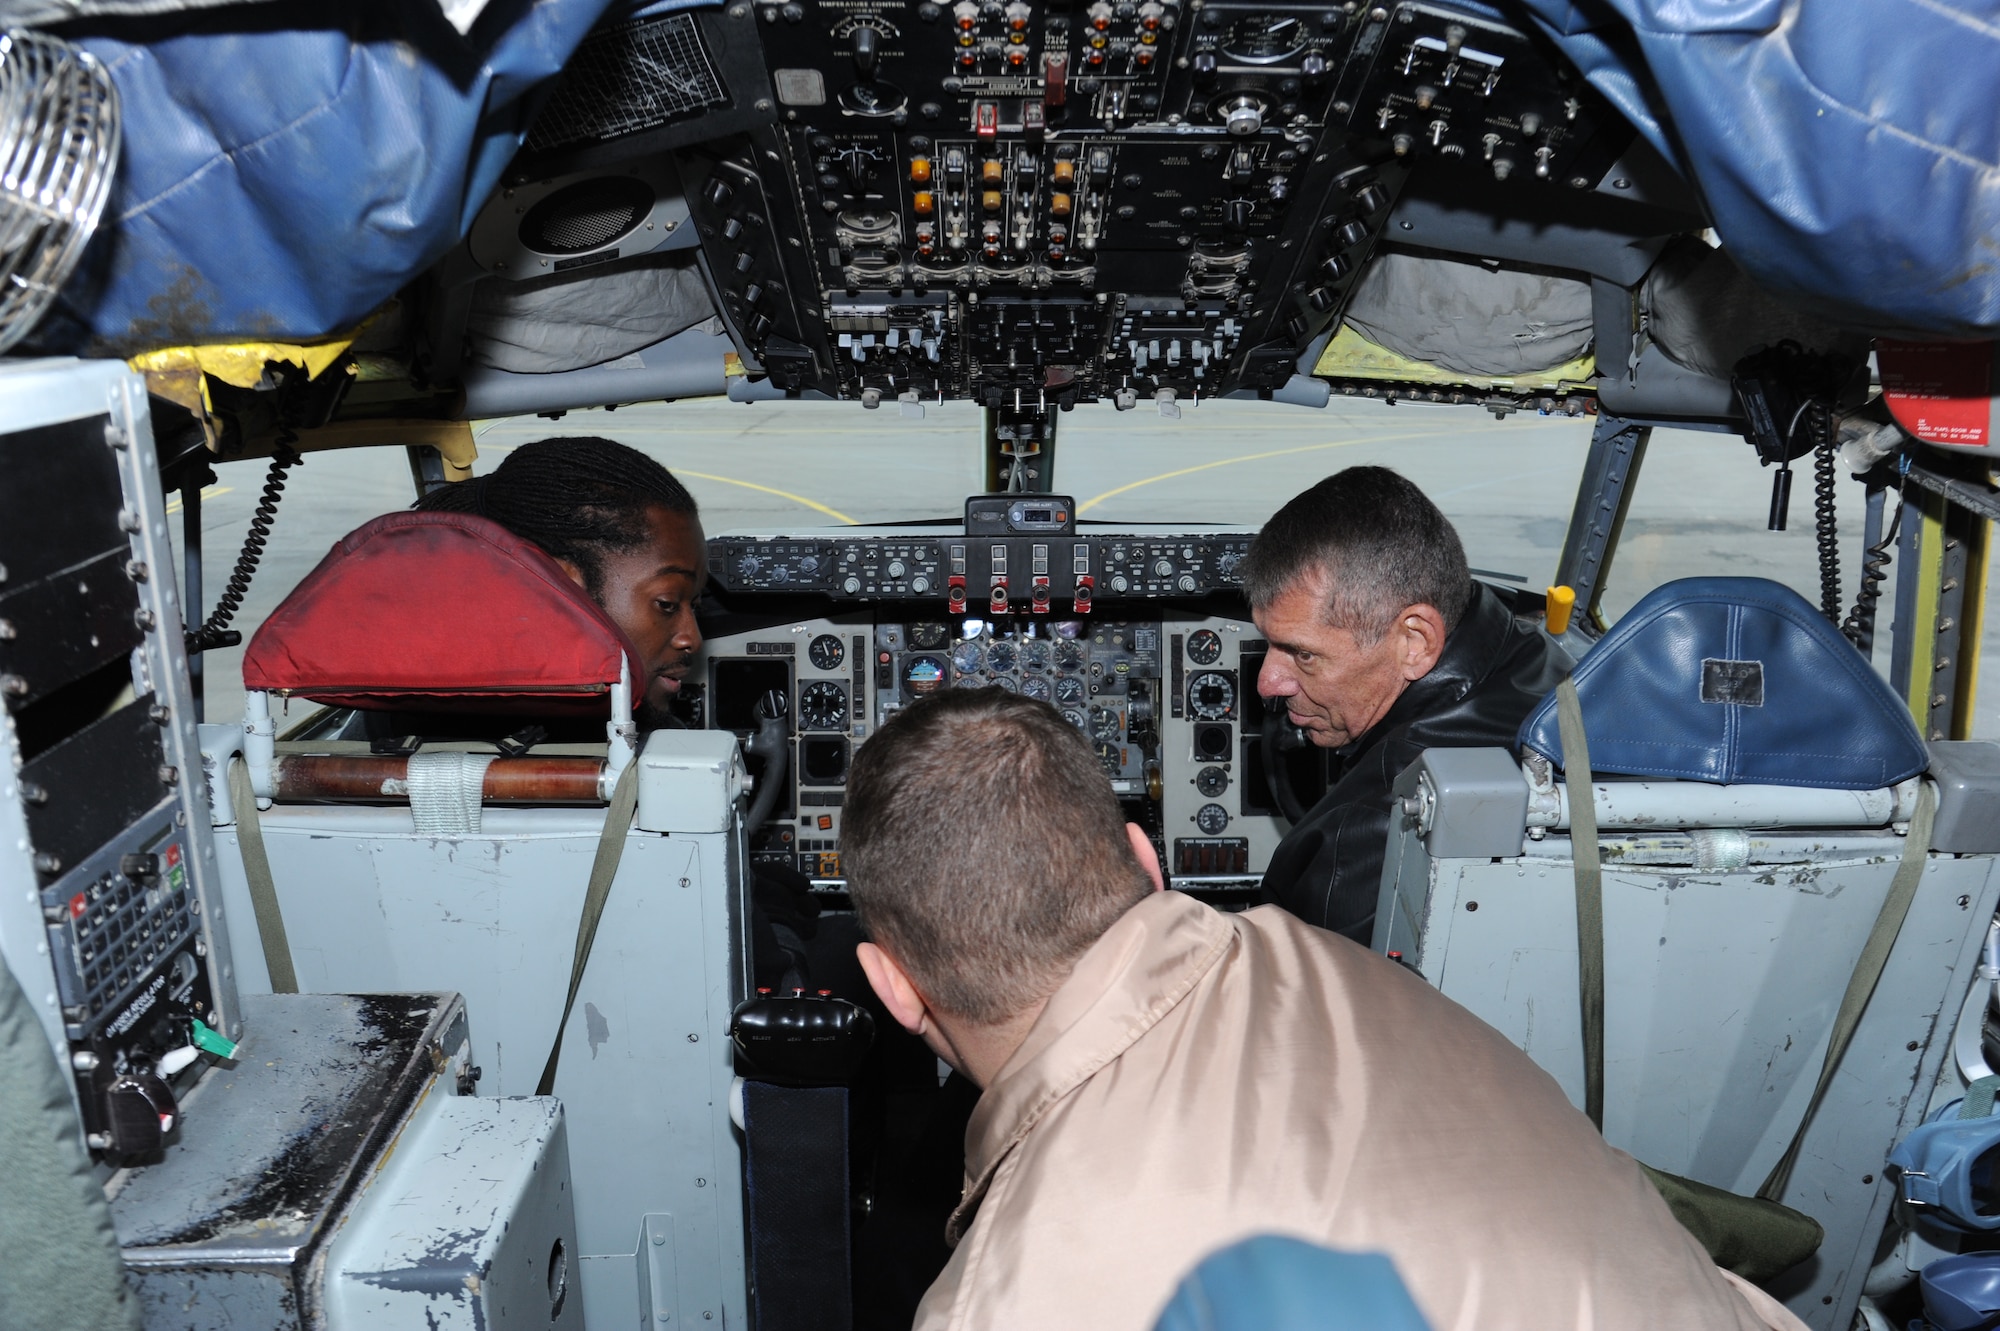 Lt. Col. Peter Tschohl (center), 22nd Expeditionary Aerial Refueling Squadron commander, explains the basics of the KC-135 Stratotanker to Vince McMahon, World Wrestling Entertainment CEO (right), and Kofi Kingston, WWE wrestler, at the Transit Center at Manas, Kyrgyzstan, Dec. 2. McMahon and Kingston visited as part of the Armed Forces Entertainment Handshake tour showing support for service members deployed through the holidays. Tschohl is deployed from the 384th Air Refueling Squadron at McConnell Air Force Base, Kan.(U.S. Air Force photo/Tech. Sgt. Hank Hoegen)